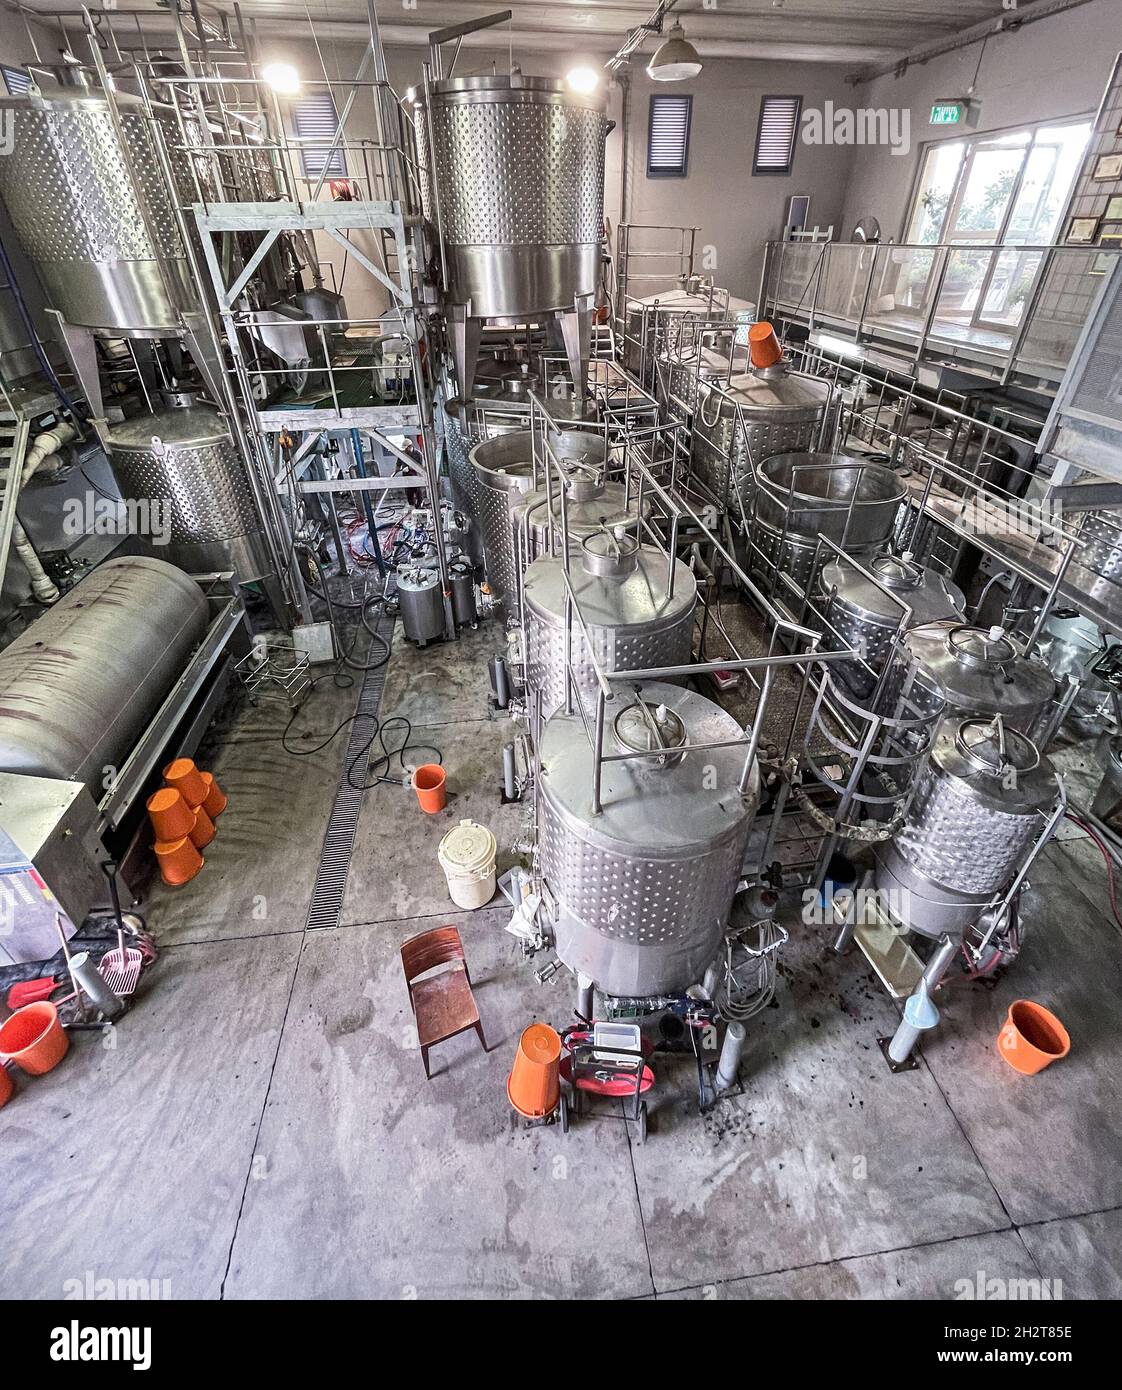 stainless steel fermentation vats and storage tanks in a small botique winery in the Gush Etzion region of the West Bank Stock Photo